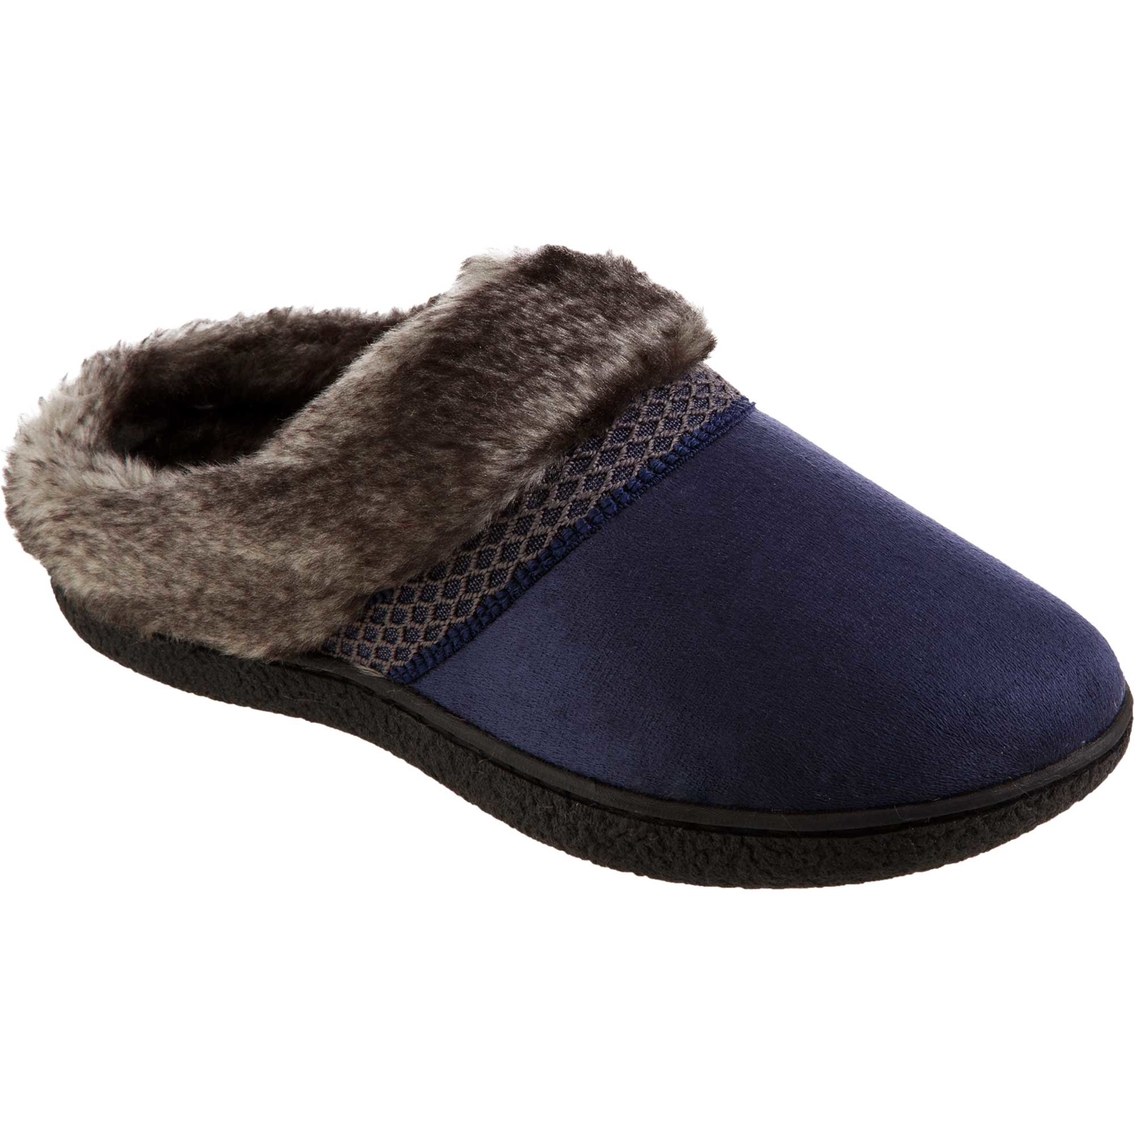 Isotoner Women's Microsuede Mallory Hoodback Slippers | Slippers ...